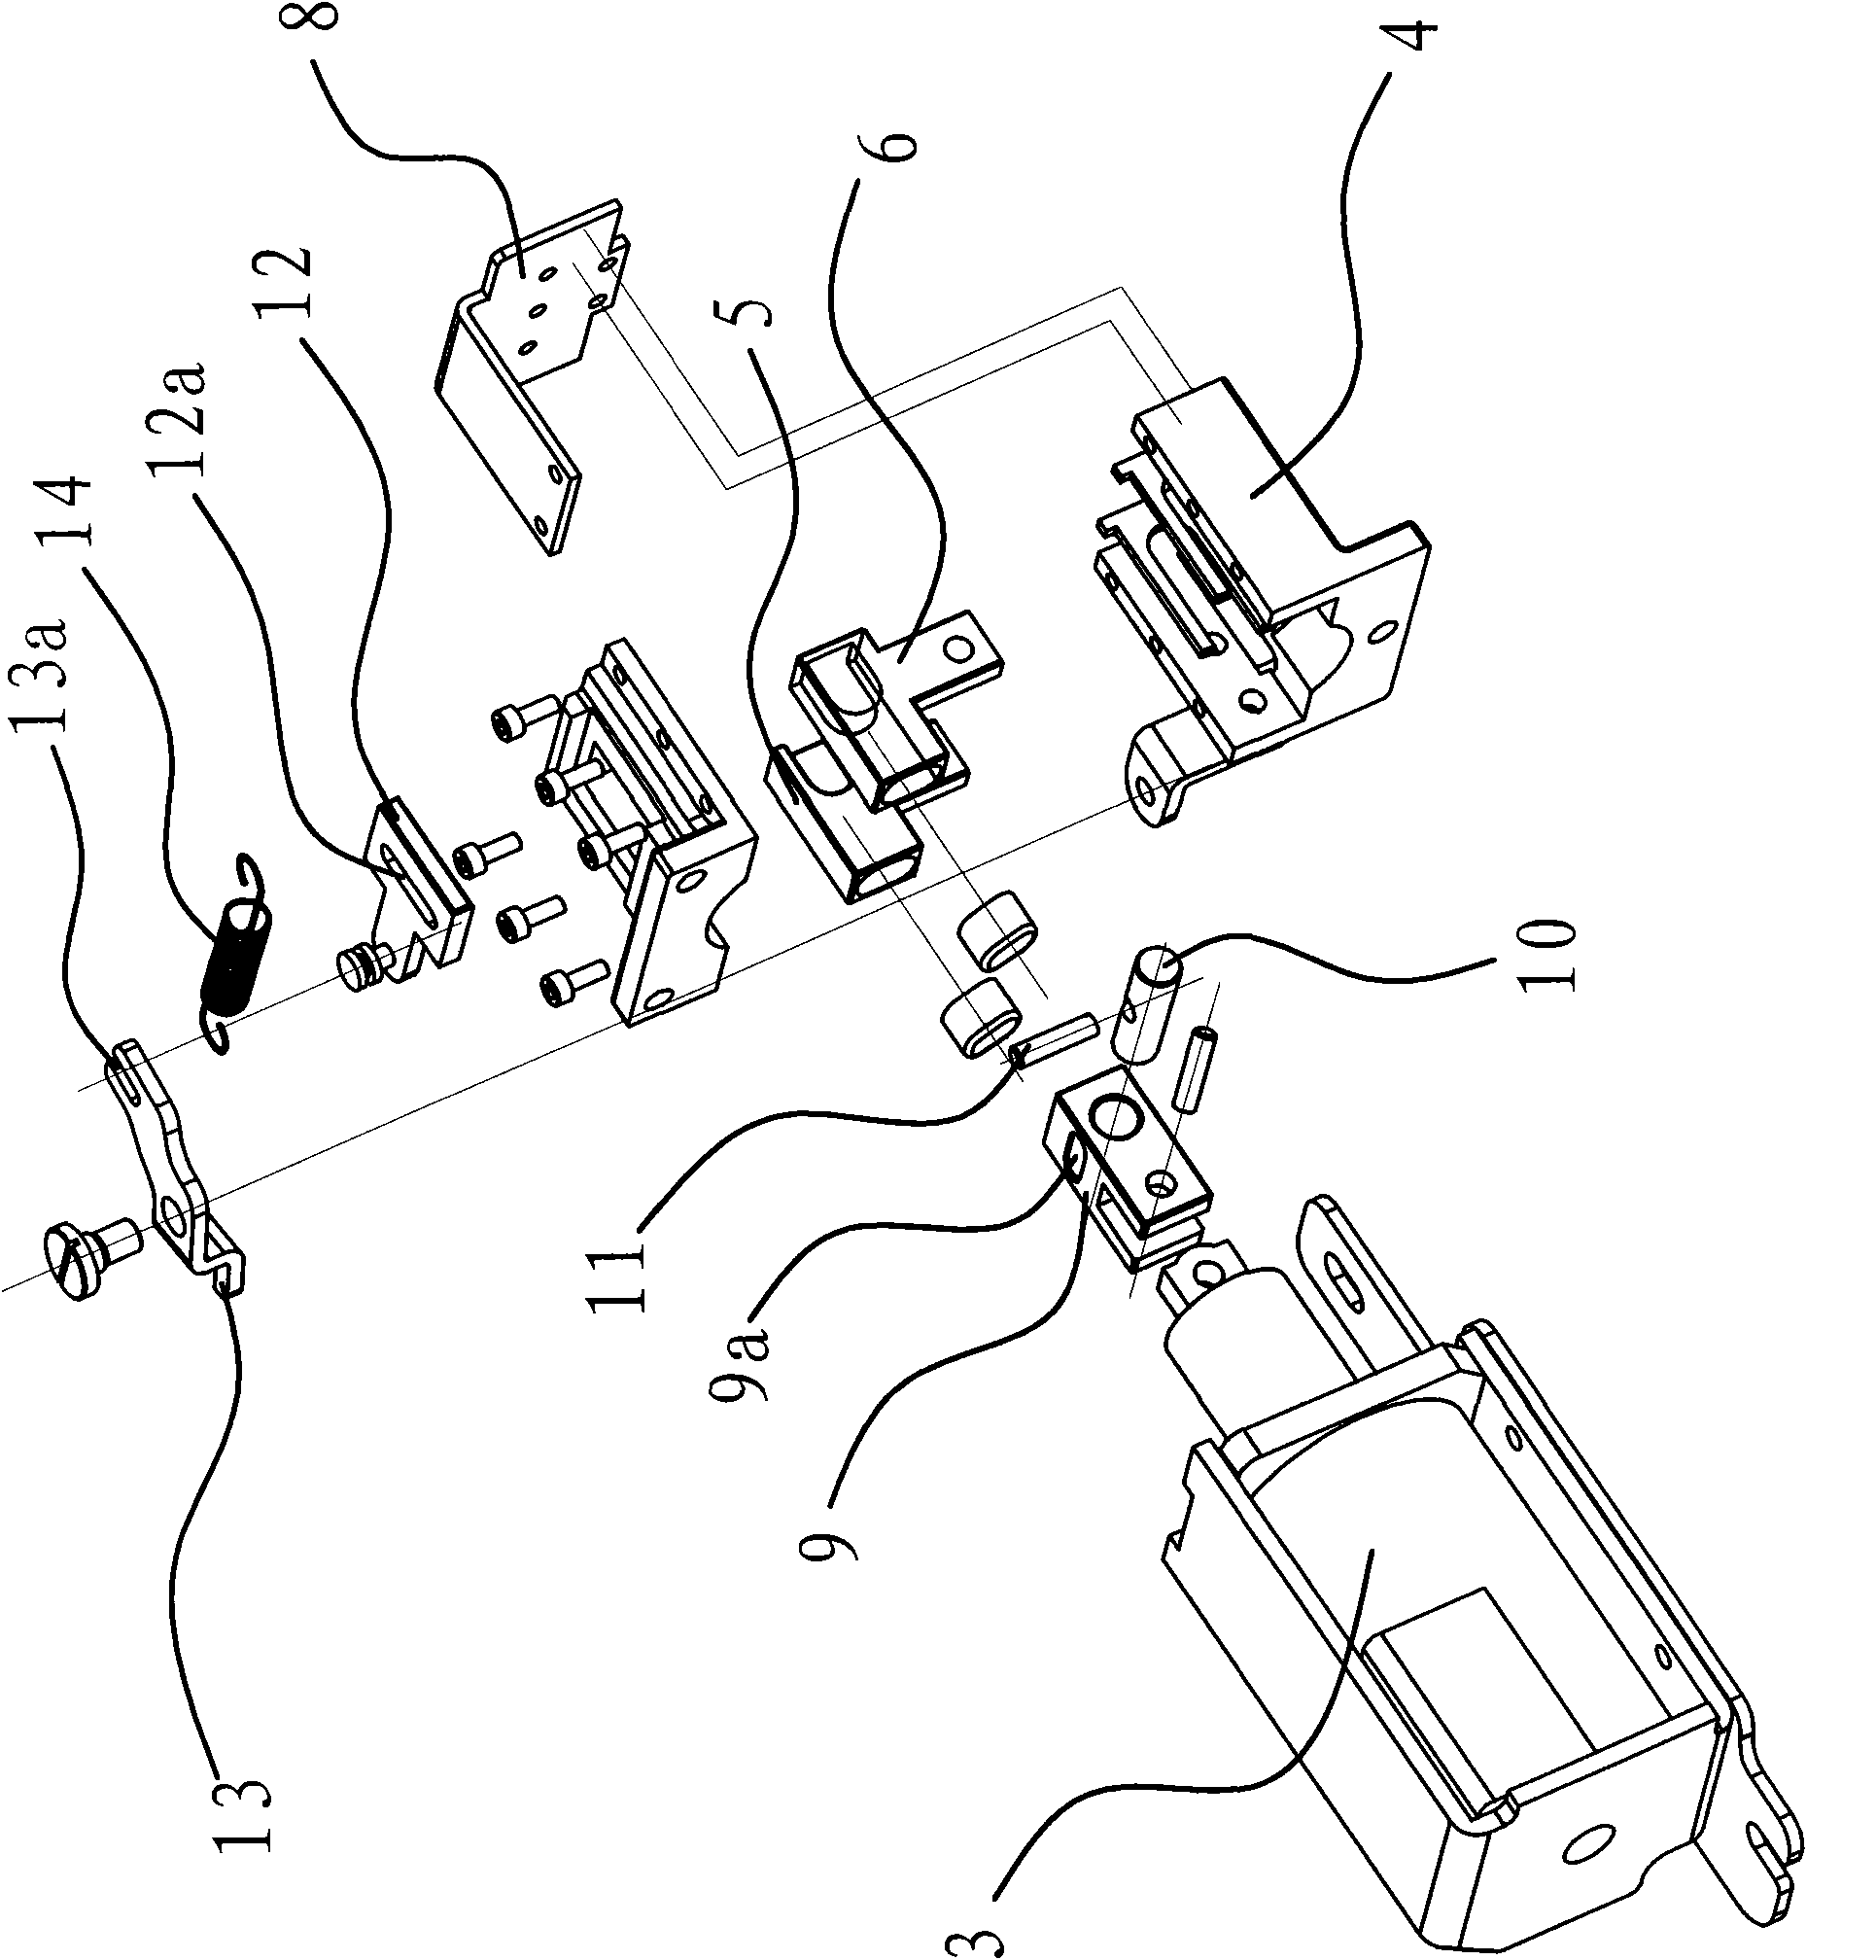 Pressure foot lifting and inverted material feeding device of sewing machine